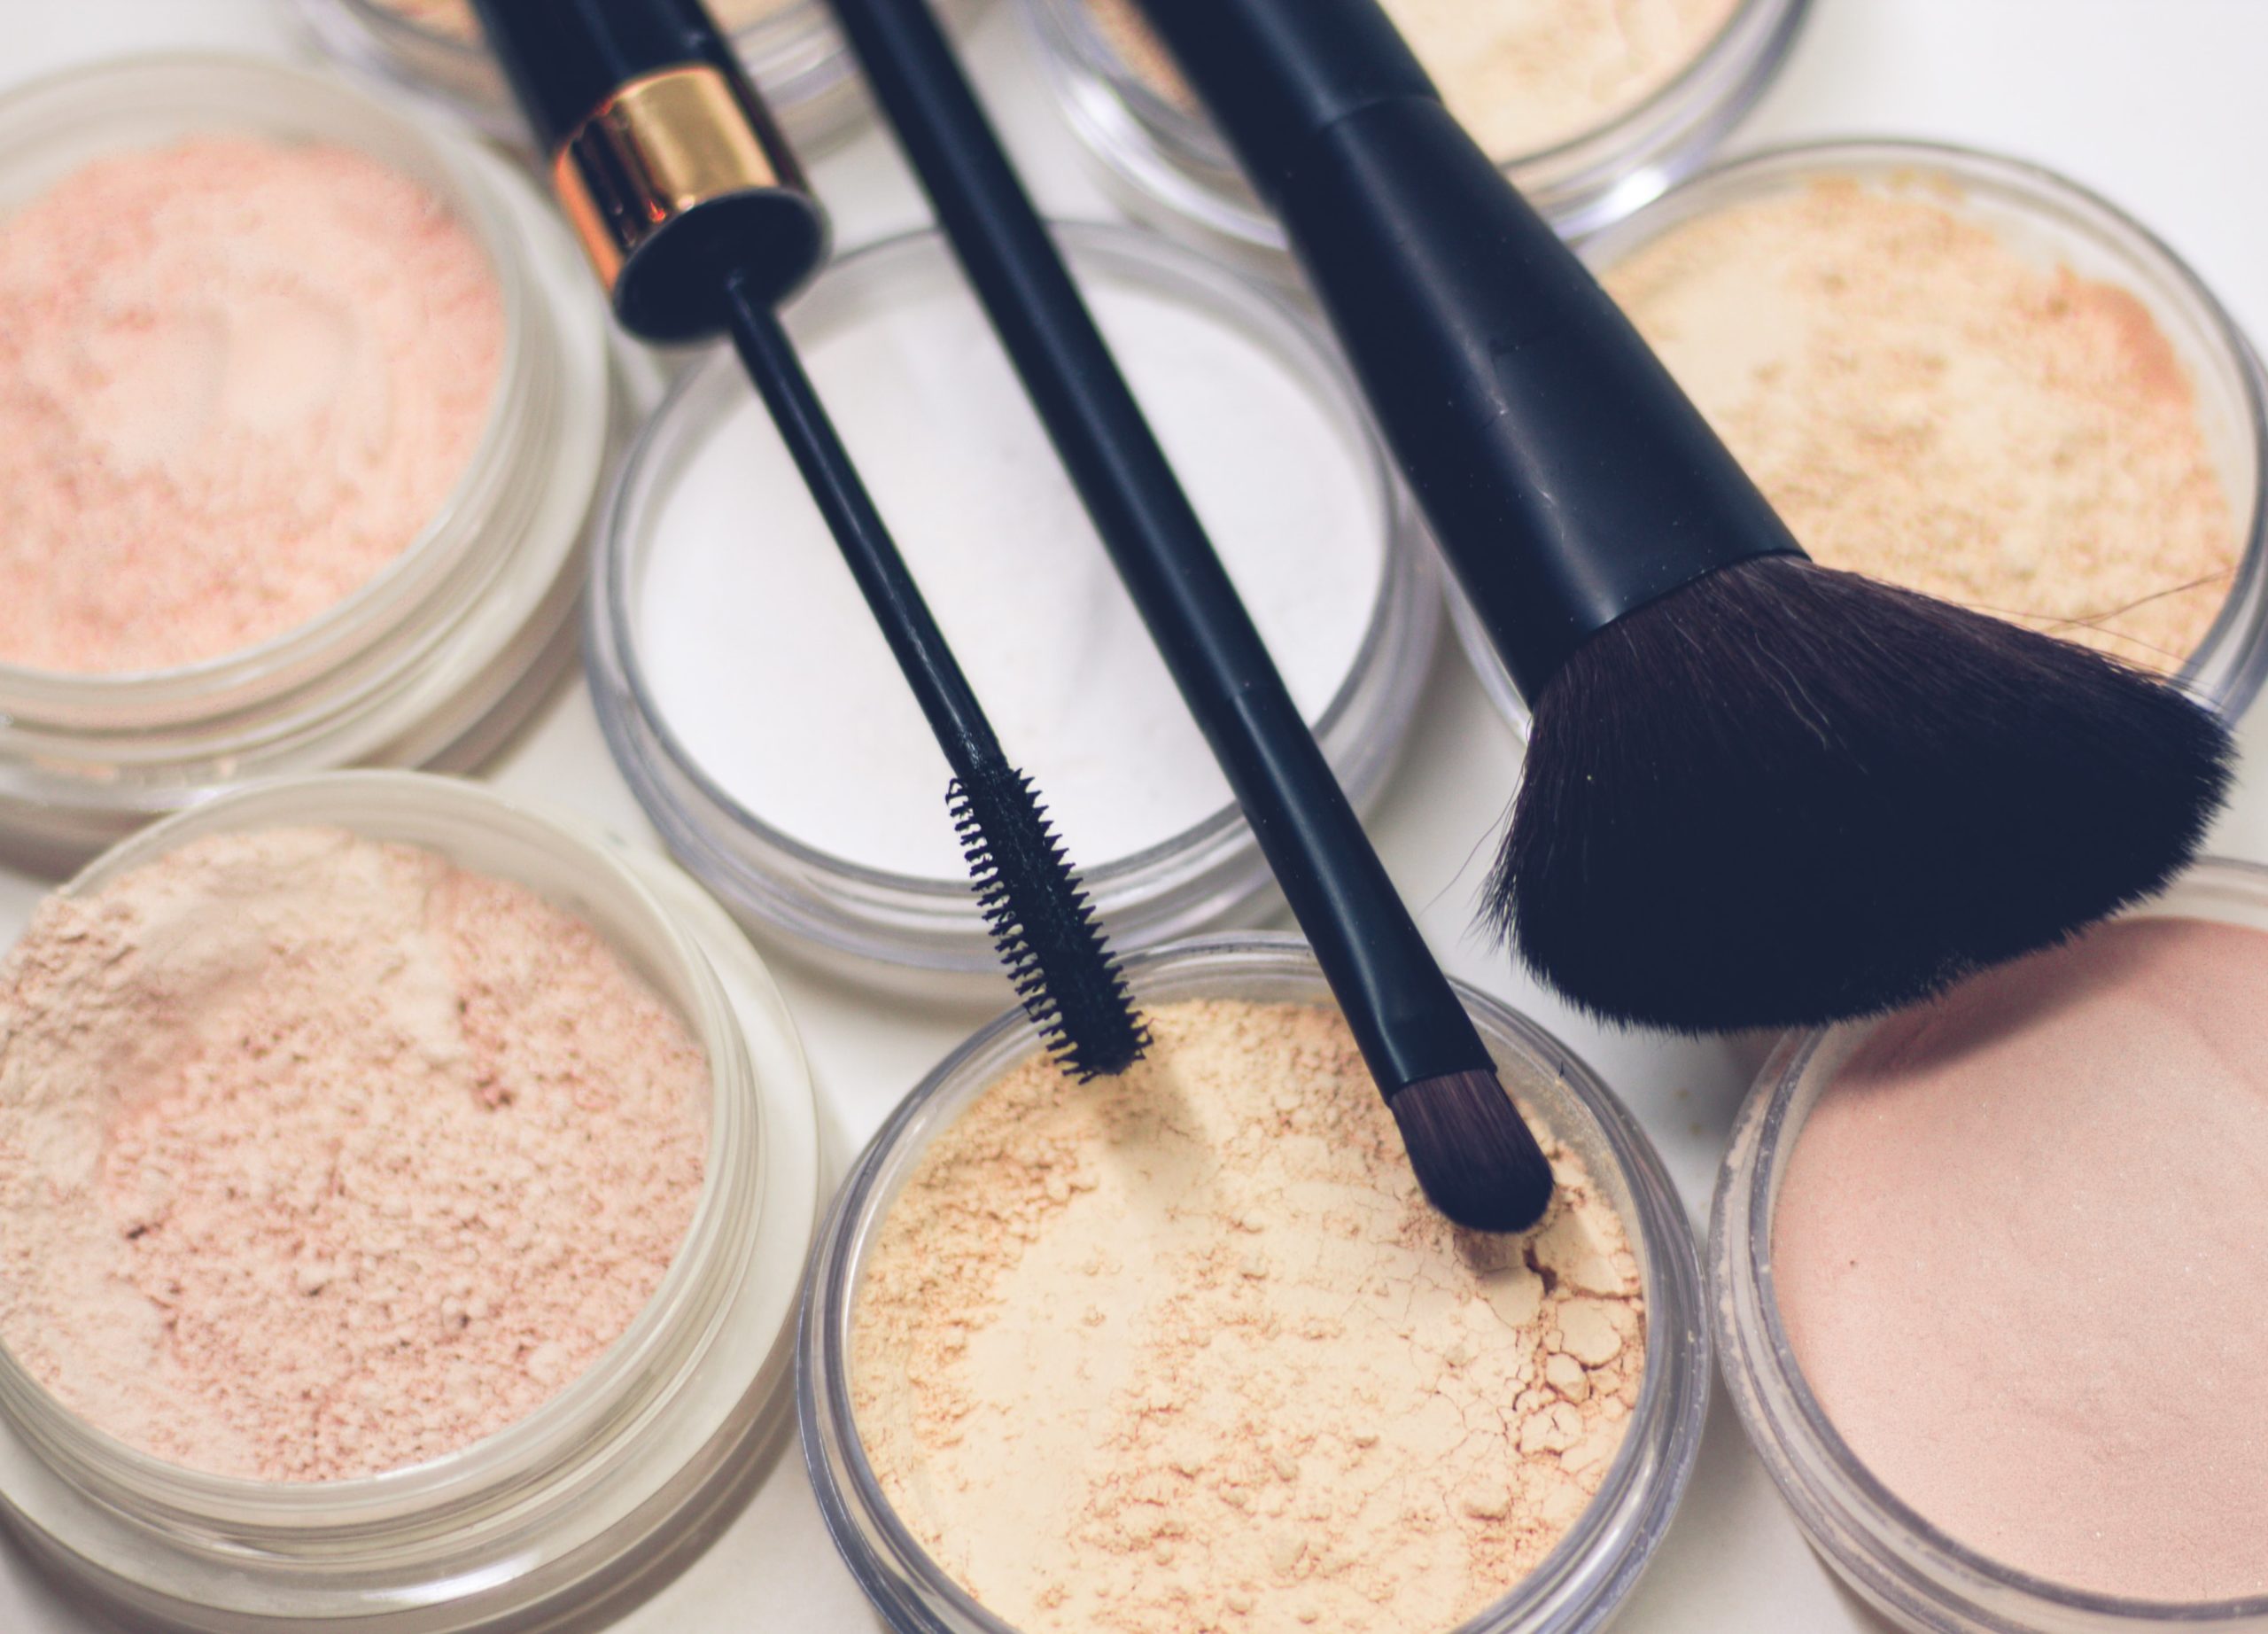 8 Best Setting Powders for Dry Skin in 2022